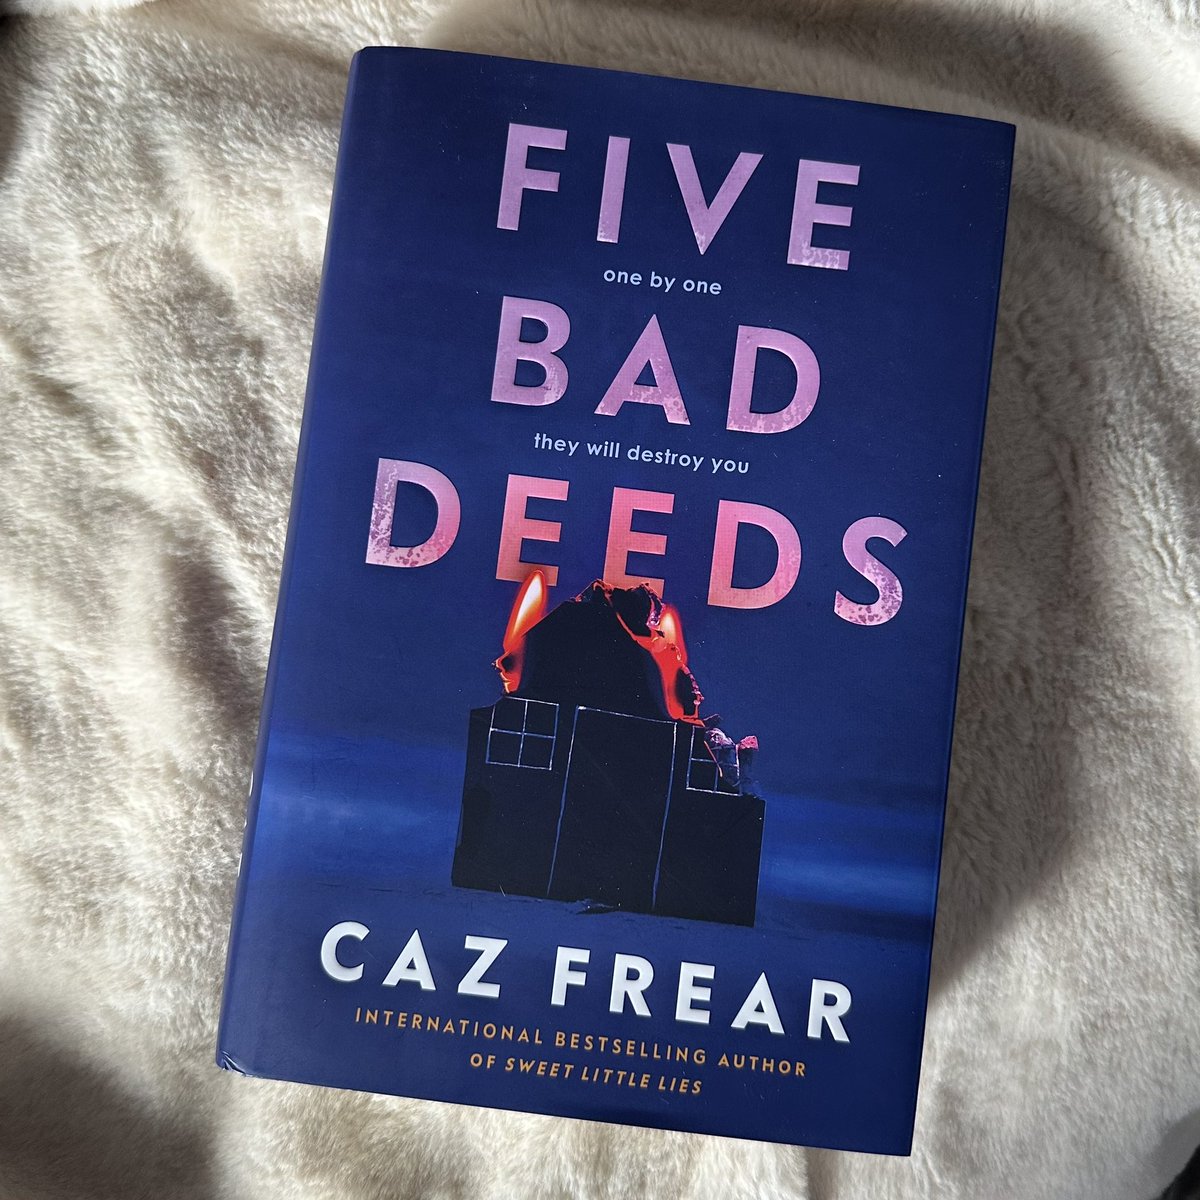 🚨 #GIVEAWAY 🚨 To celebrate #publicationweek for #FiveBadDeeds by @CazziF here’s your chance to win a copy! To enter: ⭐️Follow me ⭐️Like ⭐️Retweet 🤞Good Luck! UK only, ends 19/4. Enter here & on Insta (link in bio) to double your chances! #bookgiveaway #booktwitter